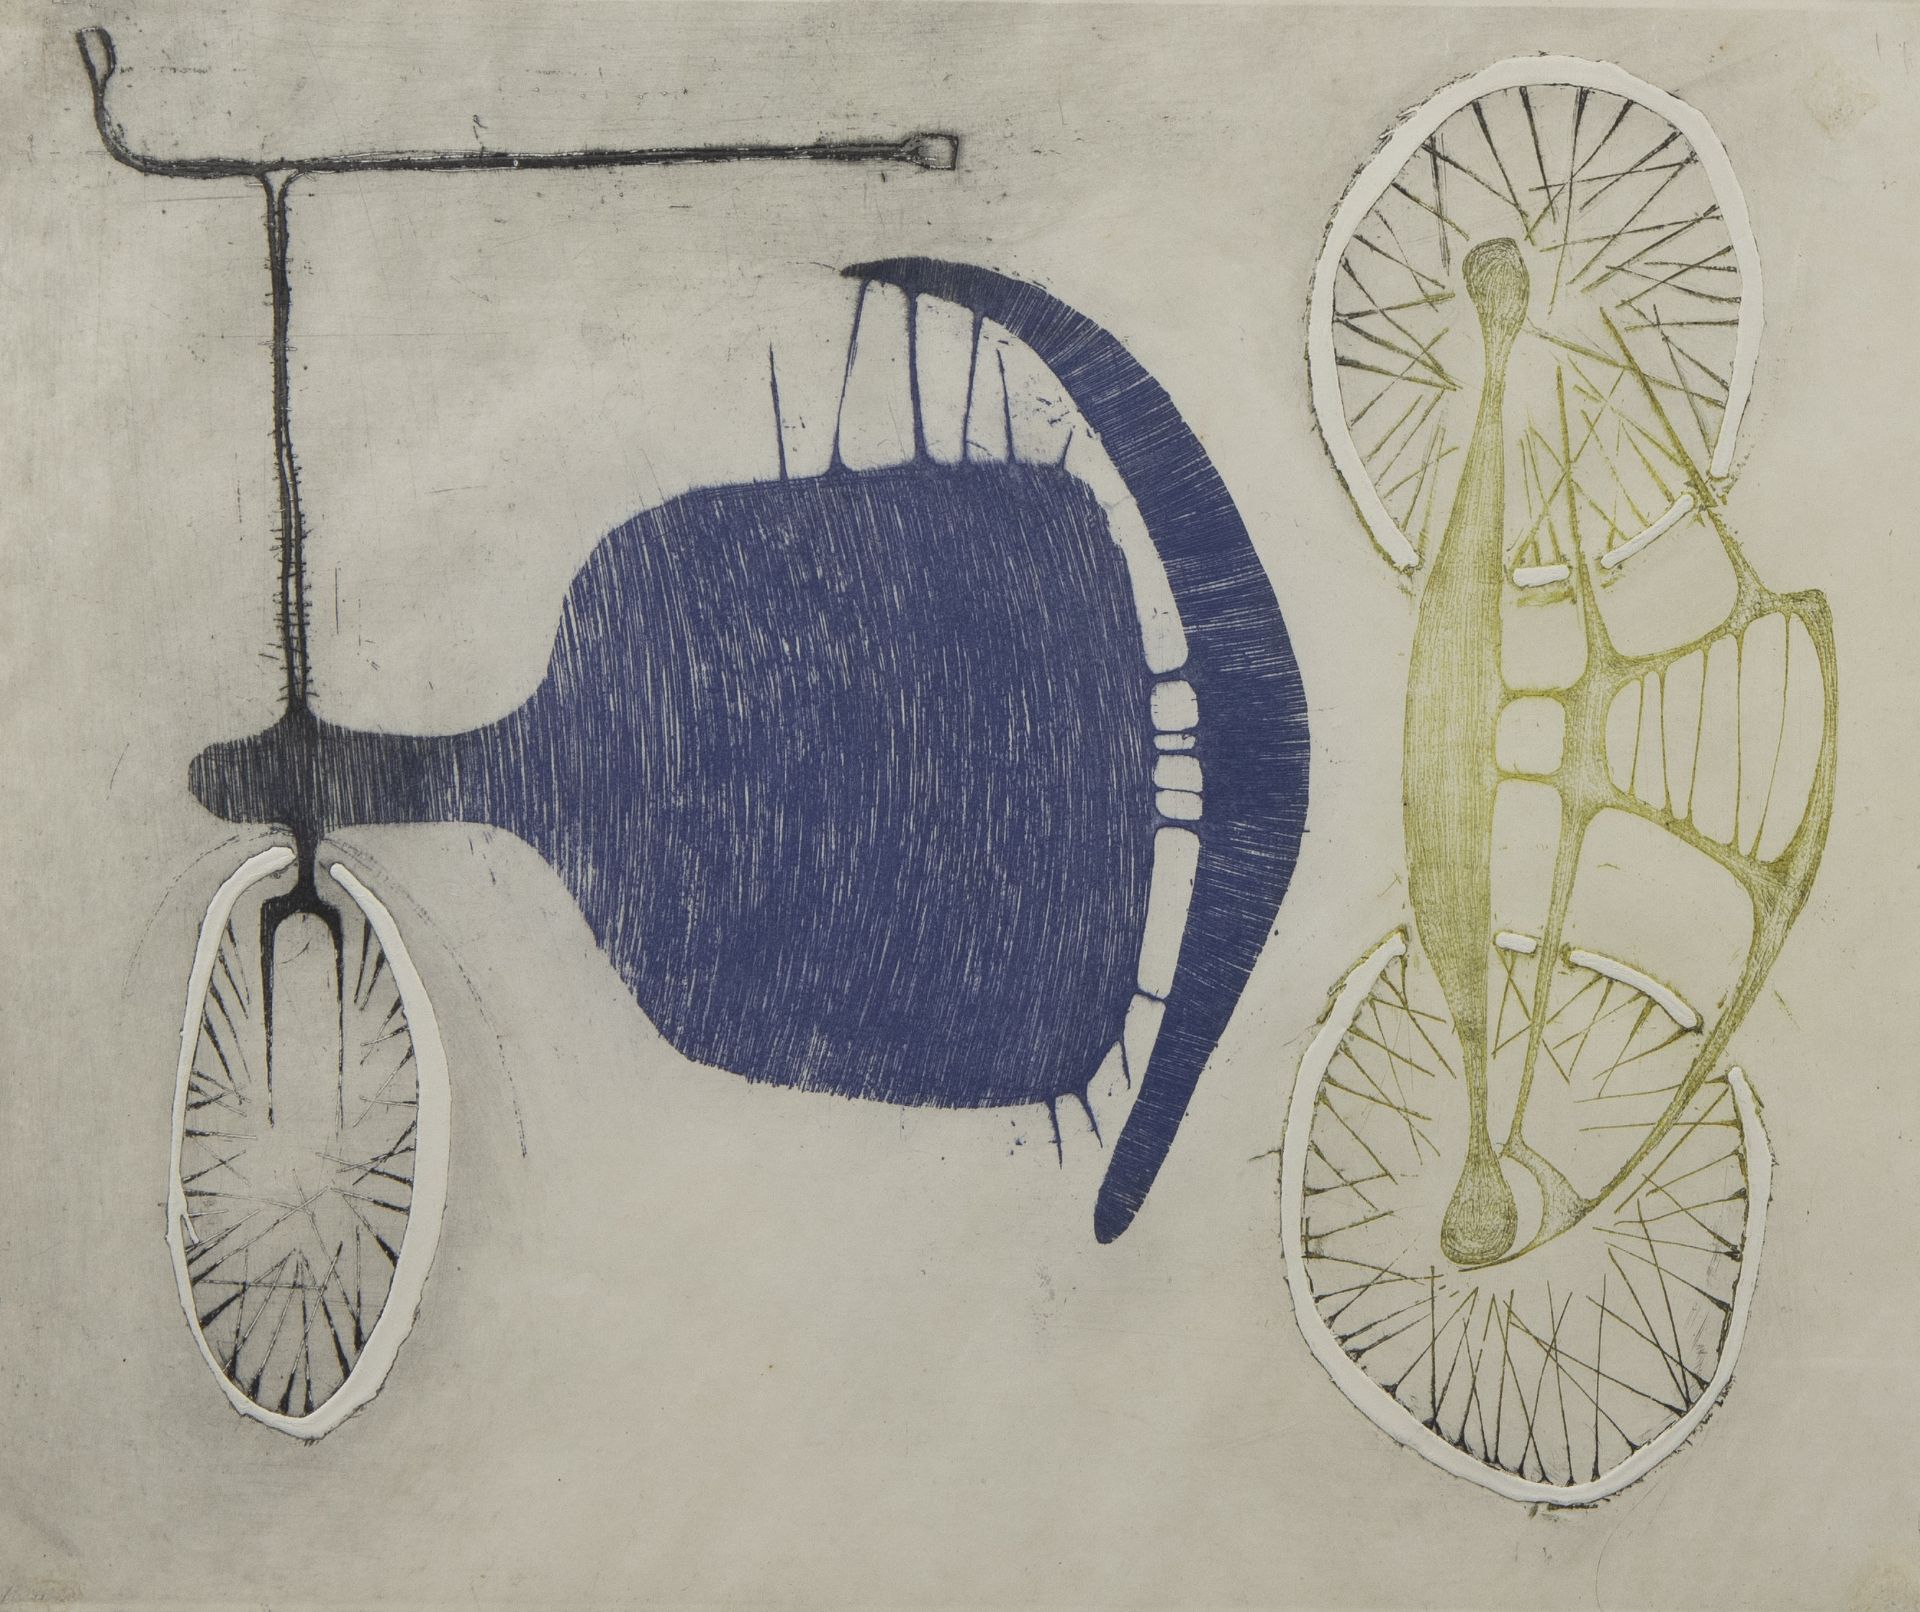 Walter LEBLANC (1932-1986), etching 'Tricycle', signed and dated '57